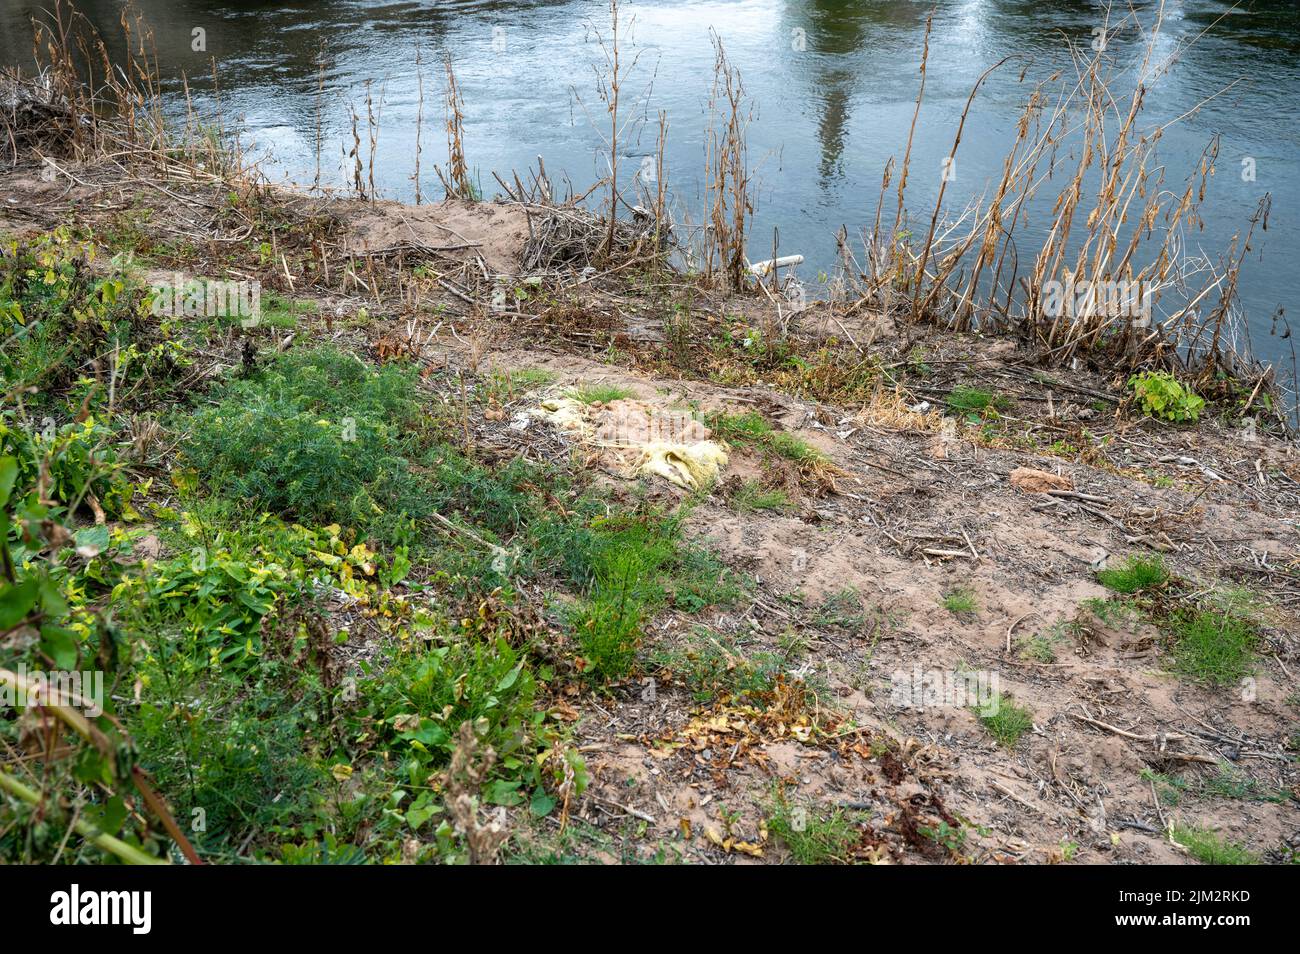 Plastic waste is partly buried in the sandy bank of the River Severn in Shrewsbury. Stock Photo